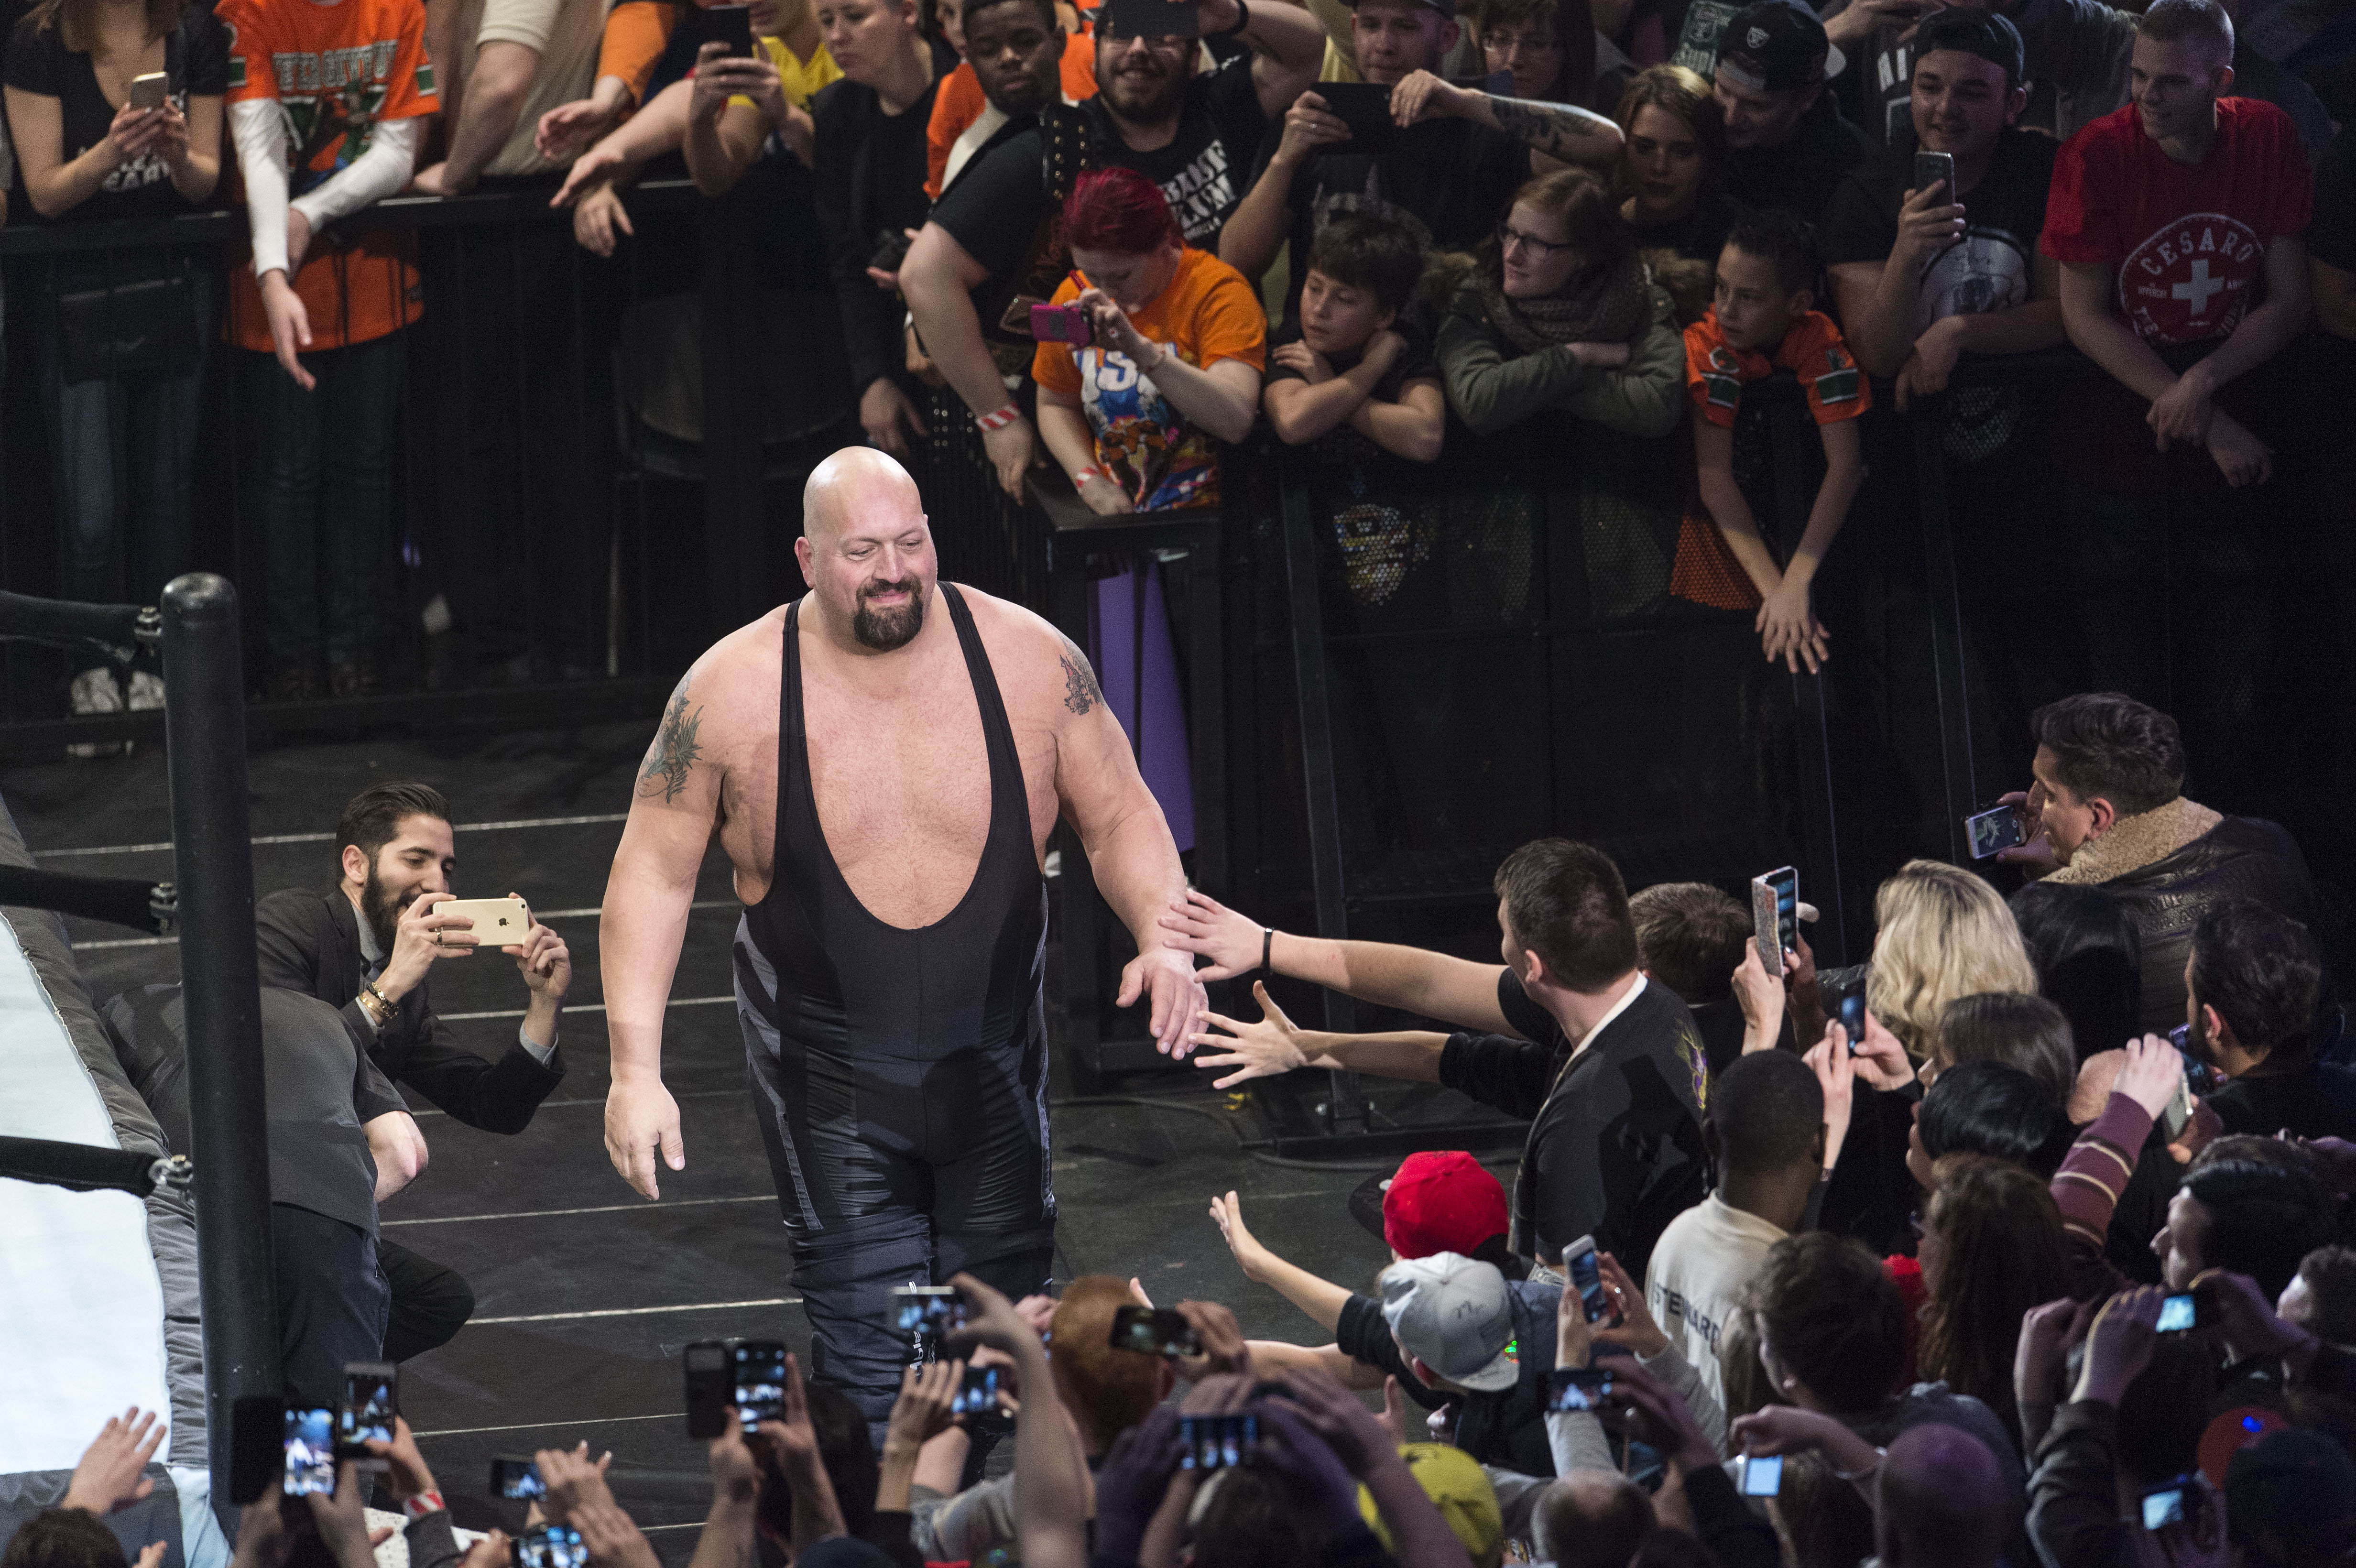 COLOGNE, GERMANY - FEBRUARY 11: Big Show during WWE Road to WrestleMania at the Lanxess Arena on February 11, 2016 in Cologne, Germany. (Photo by Marc Pfitzenreuter/Getty Images)